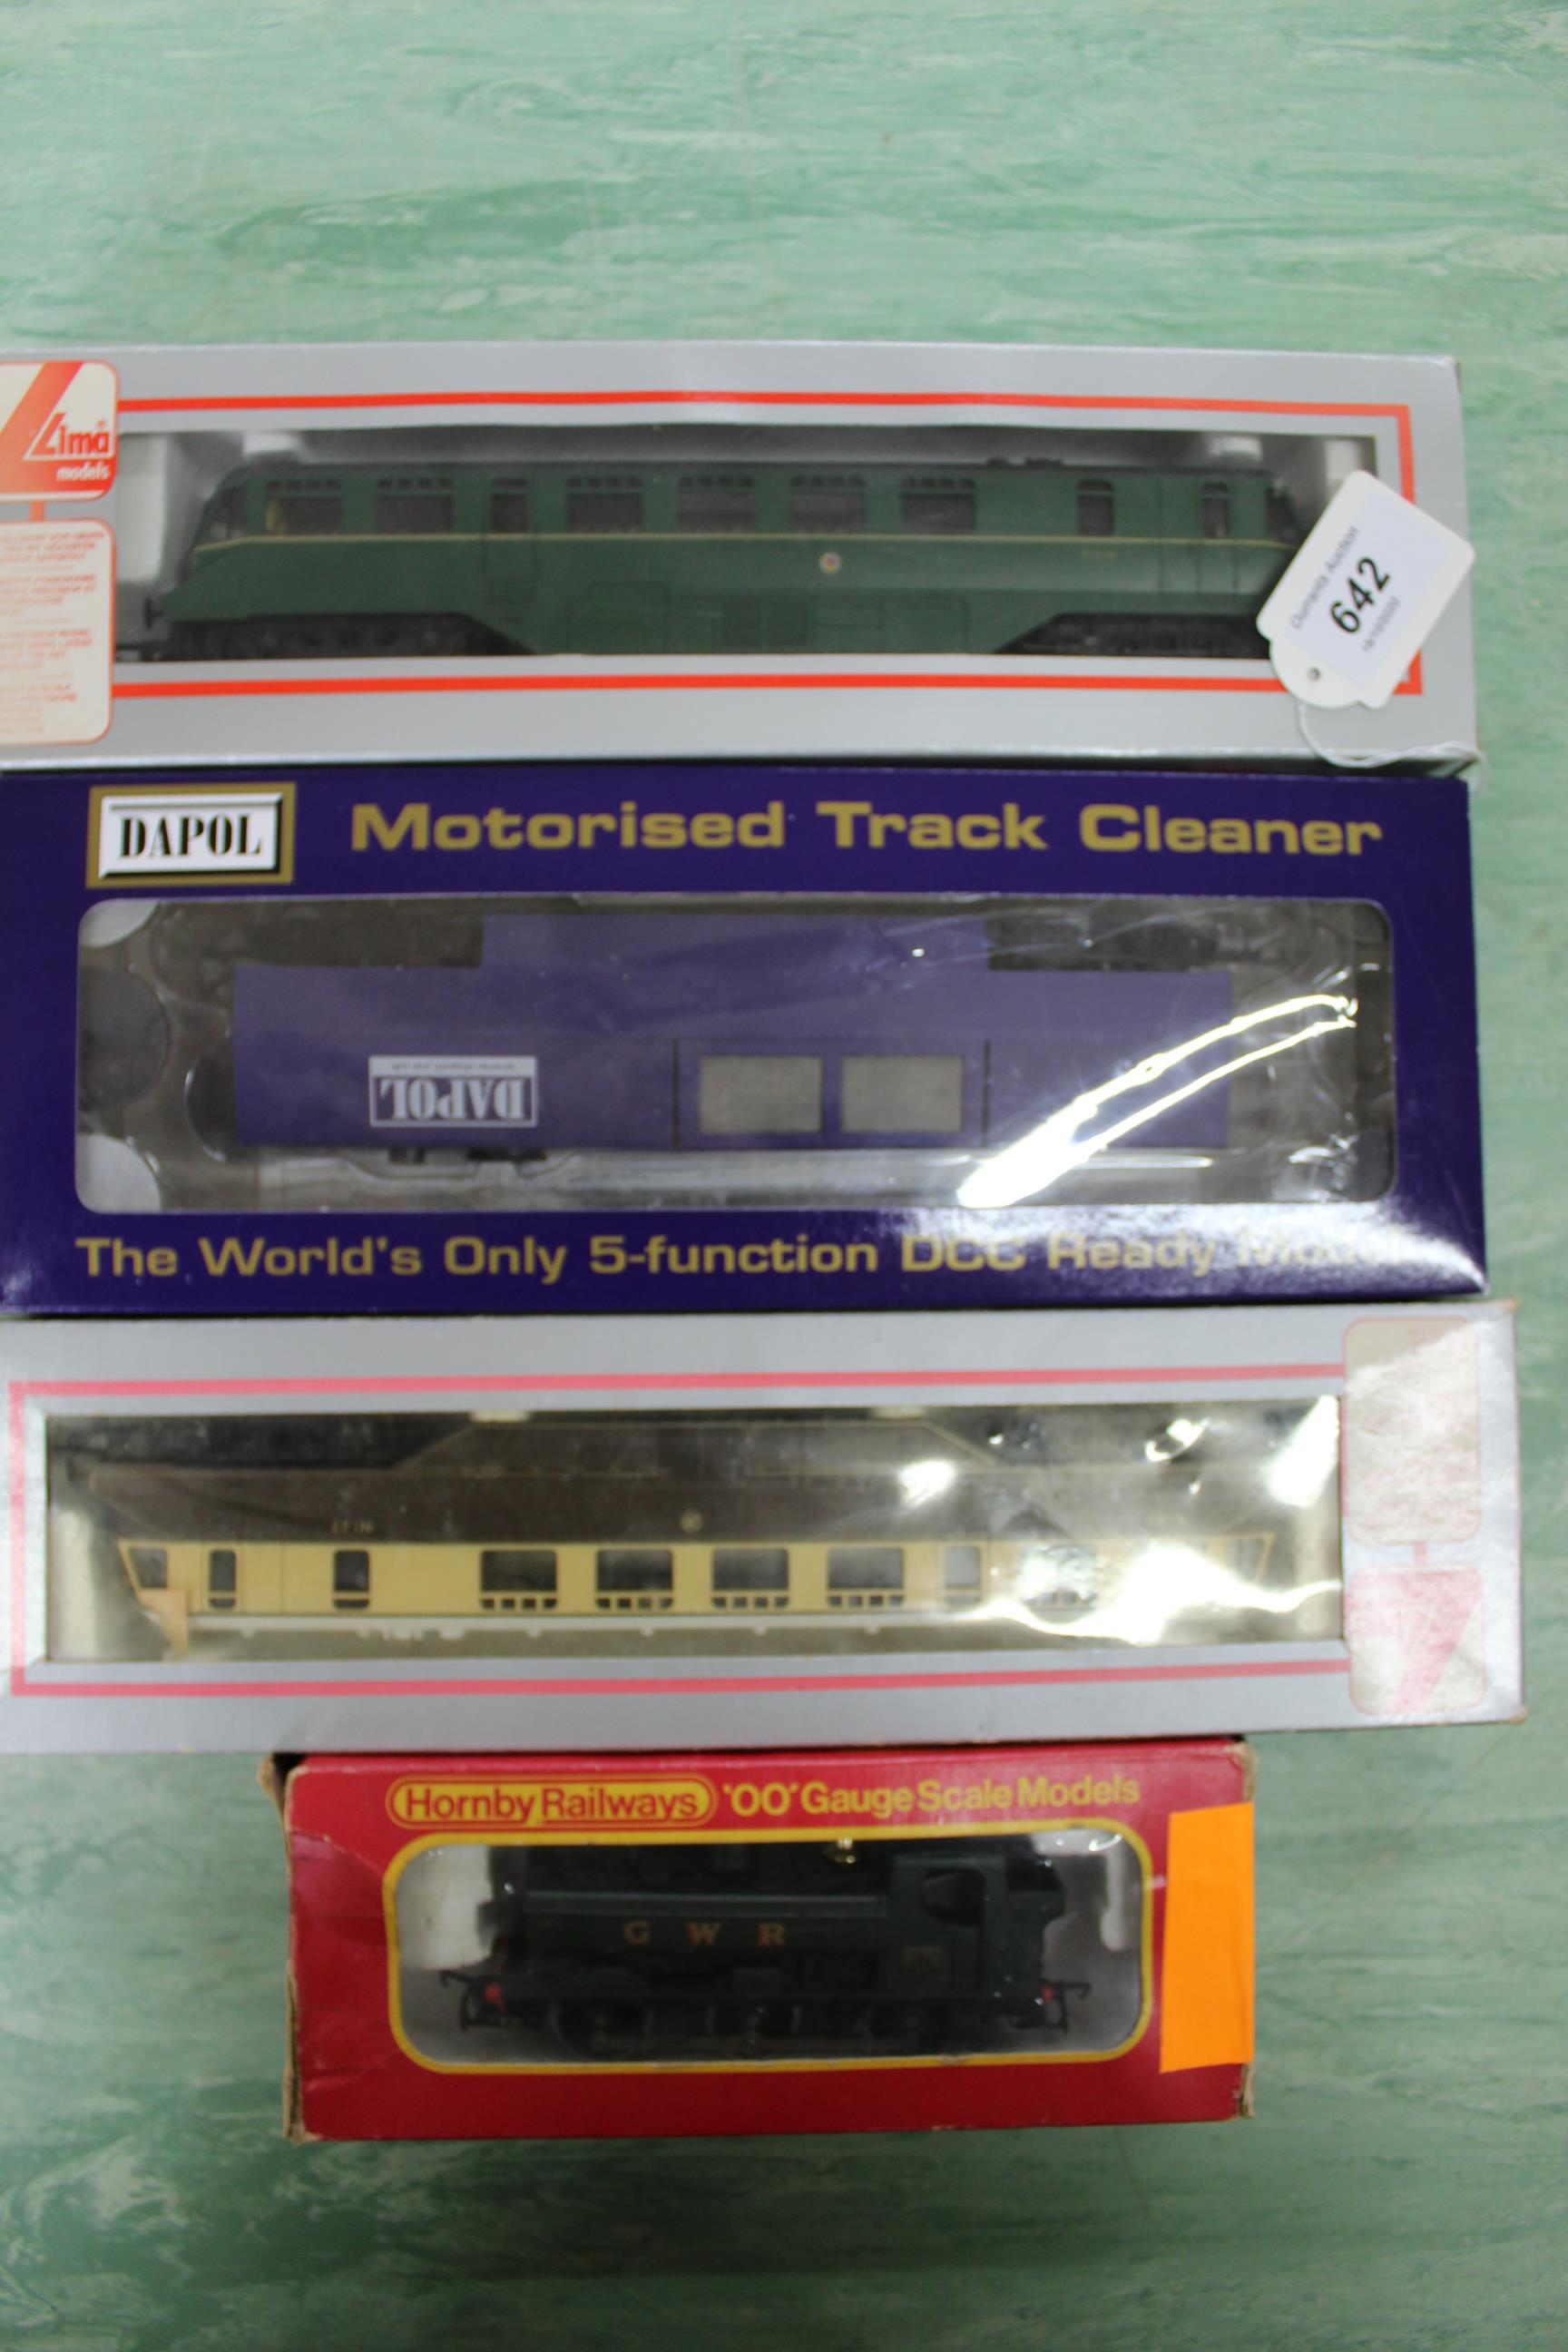 A Dapol motorised track cleaner,